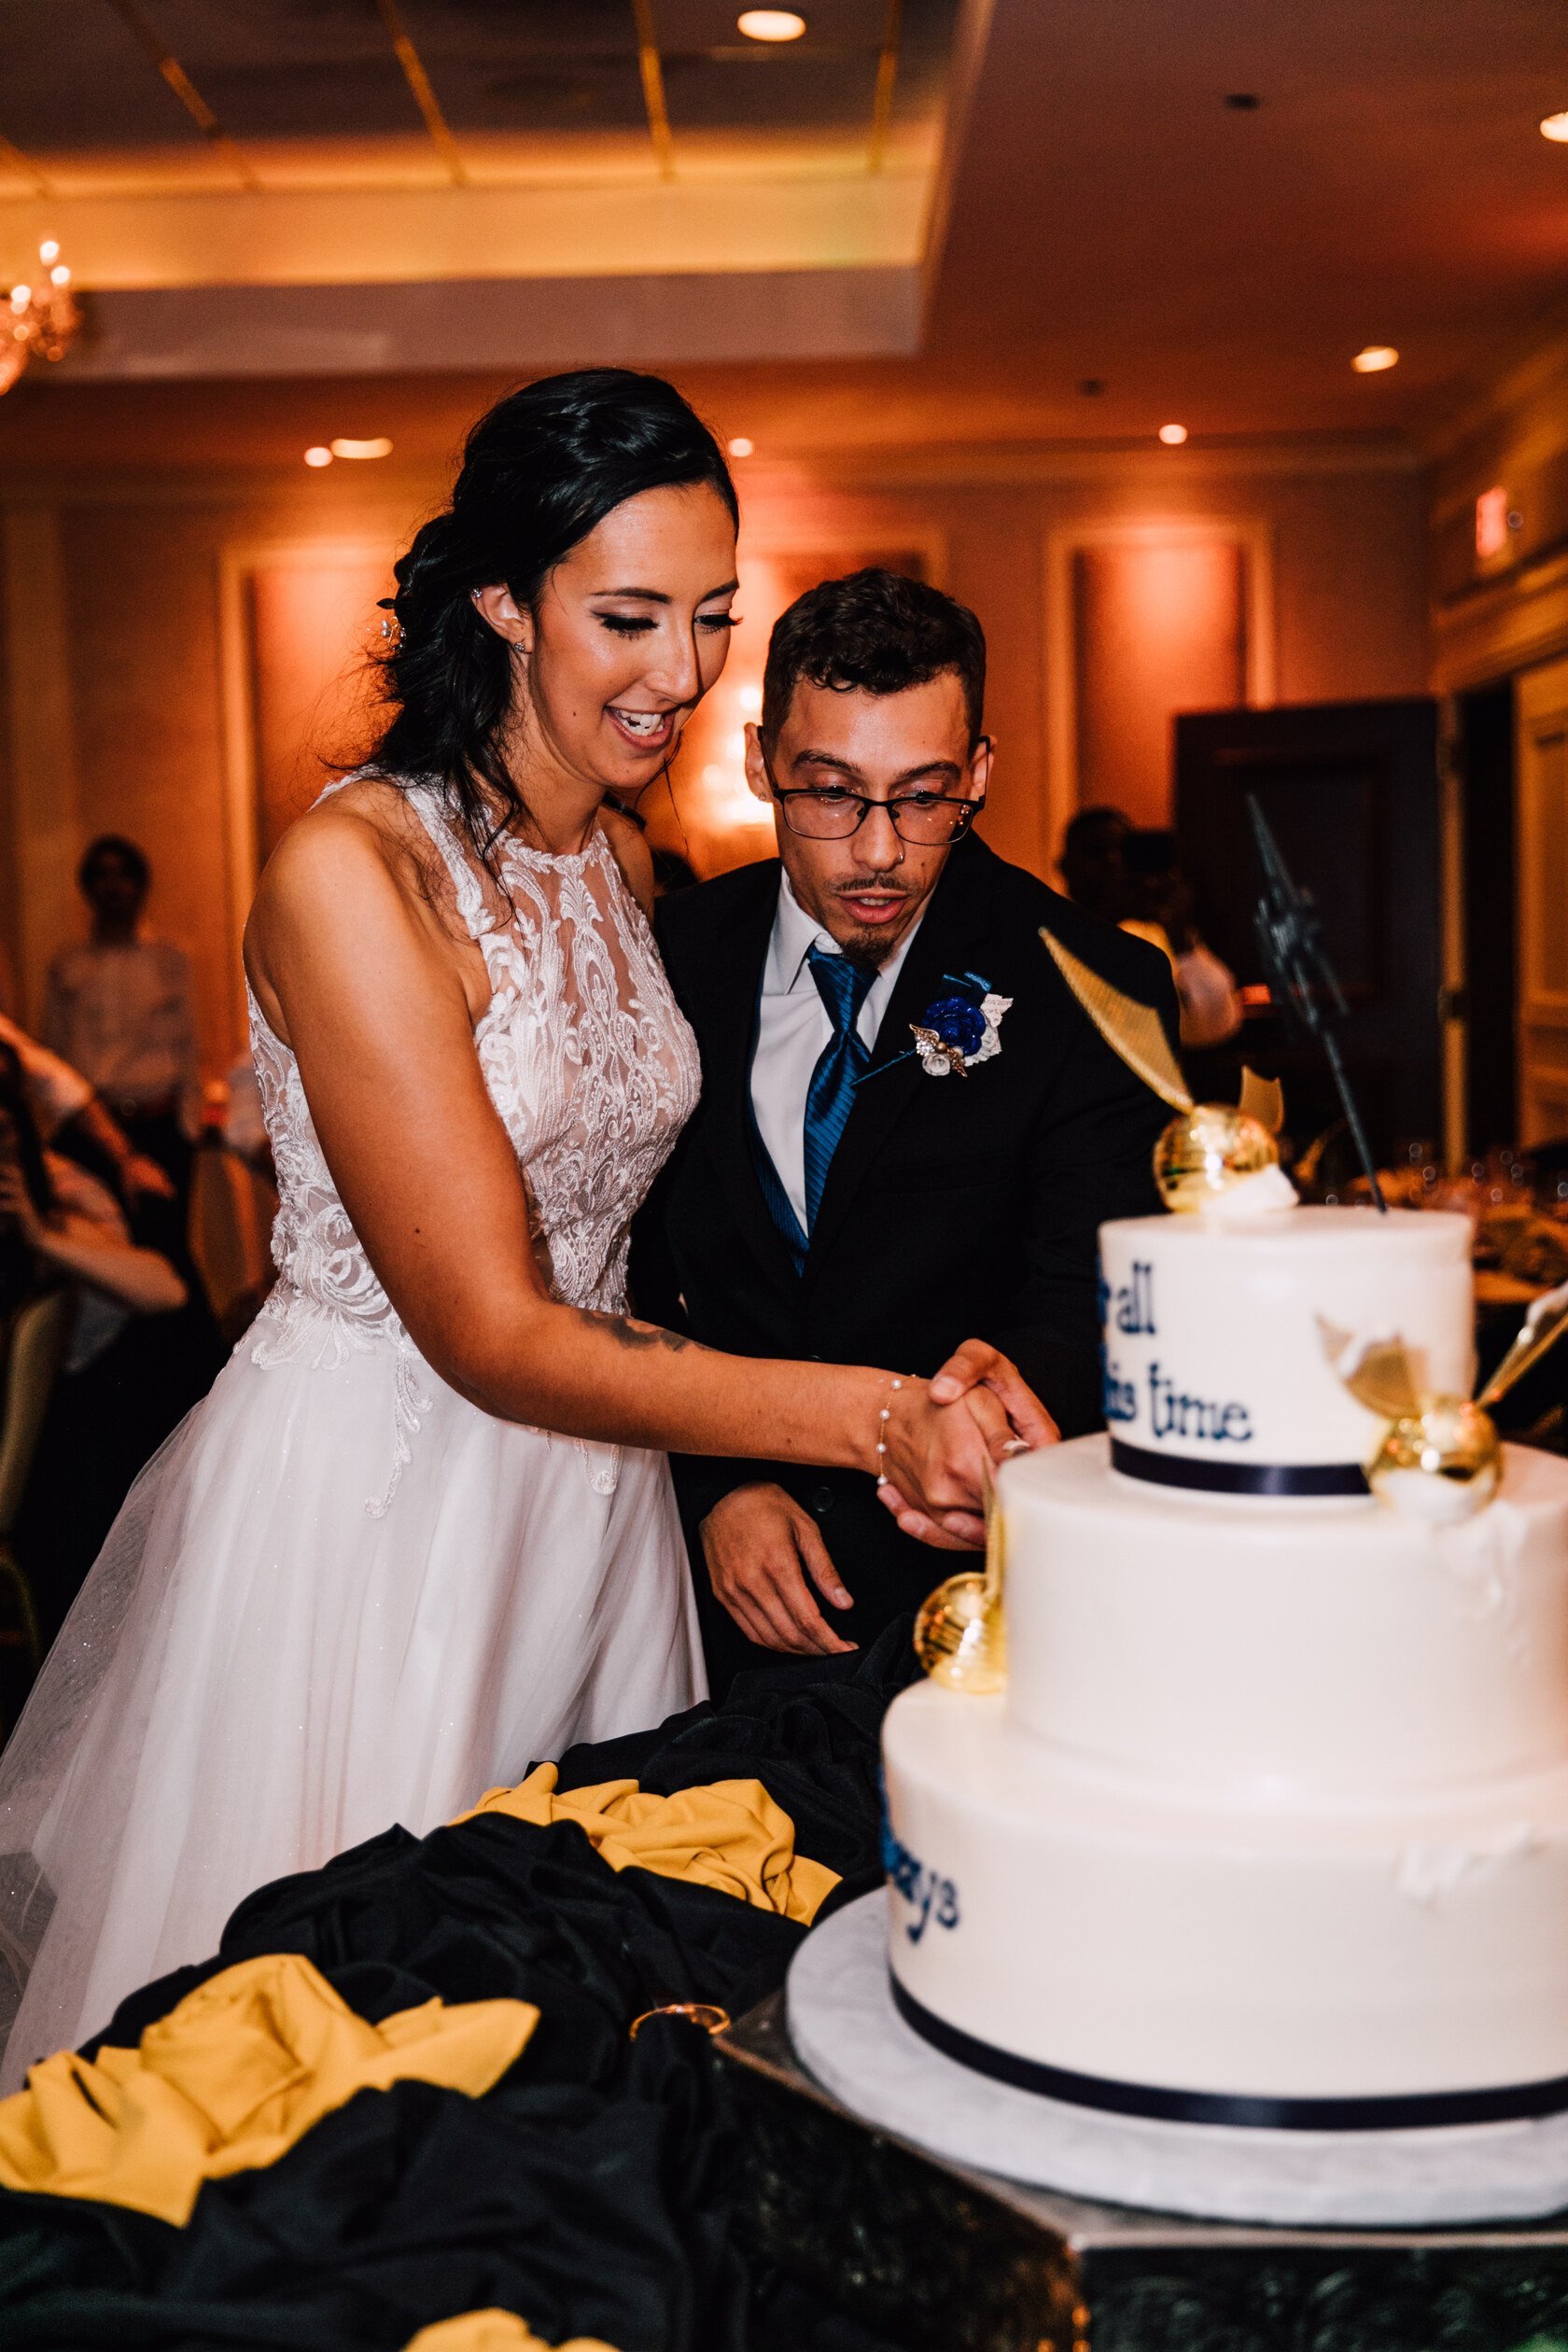  the newlyweds cut their harry potter wedding cake  